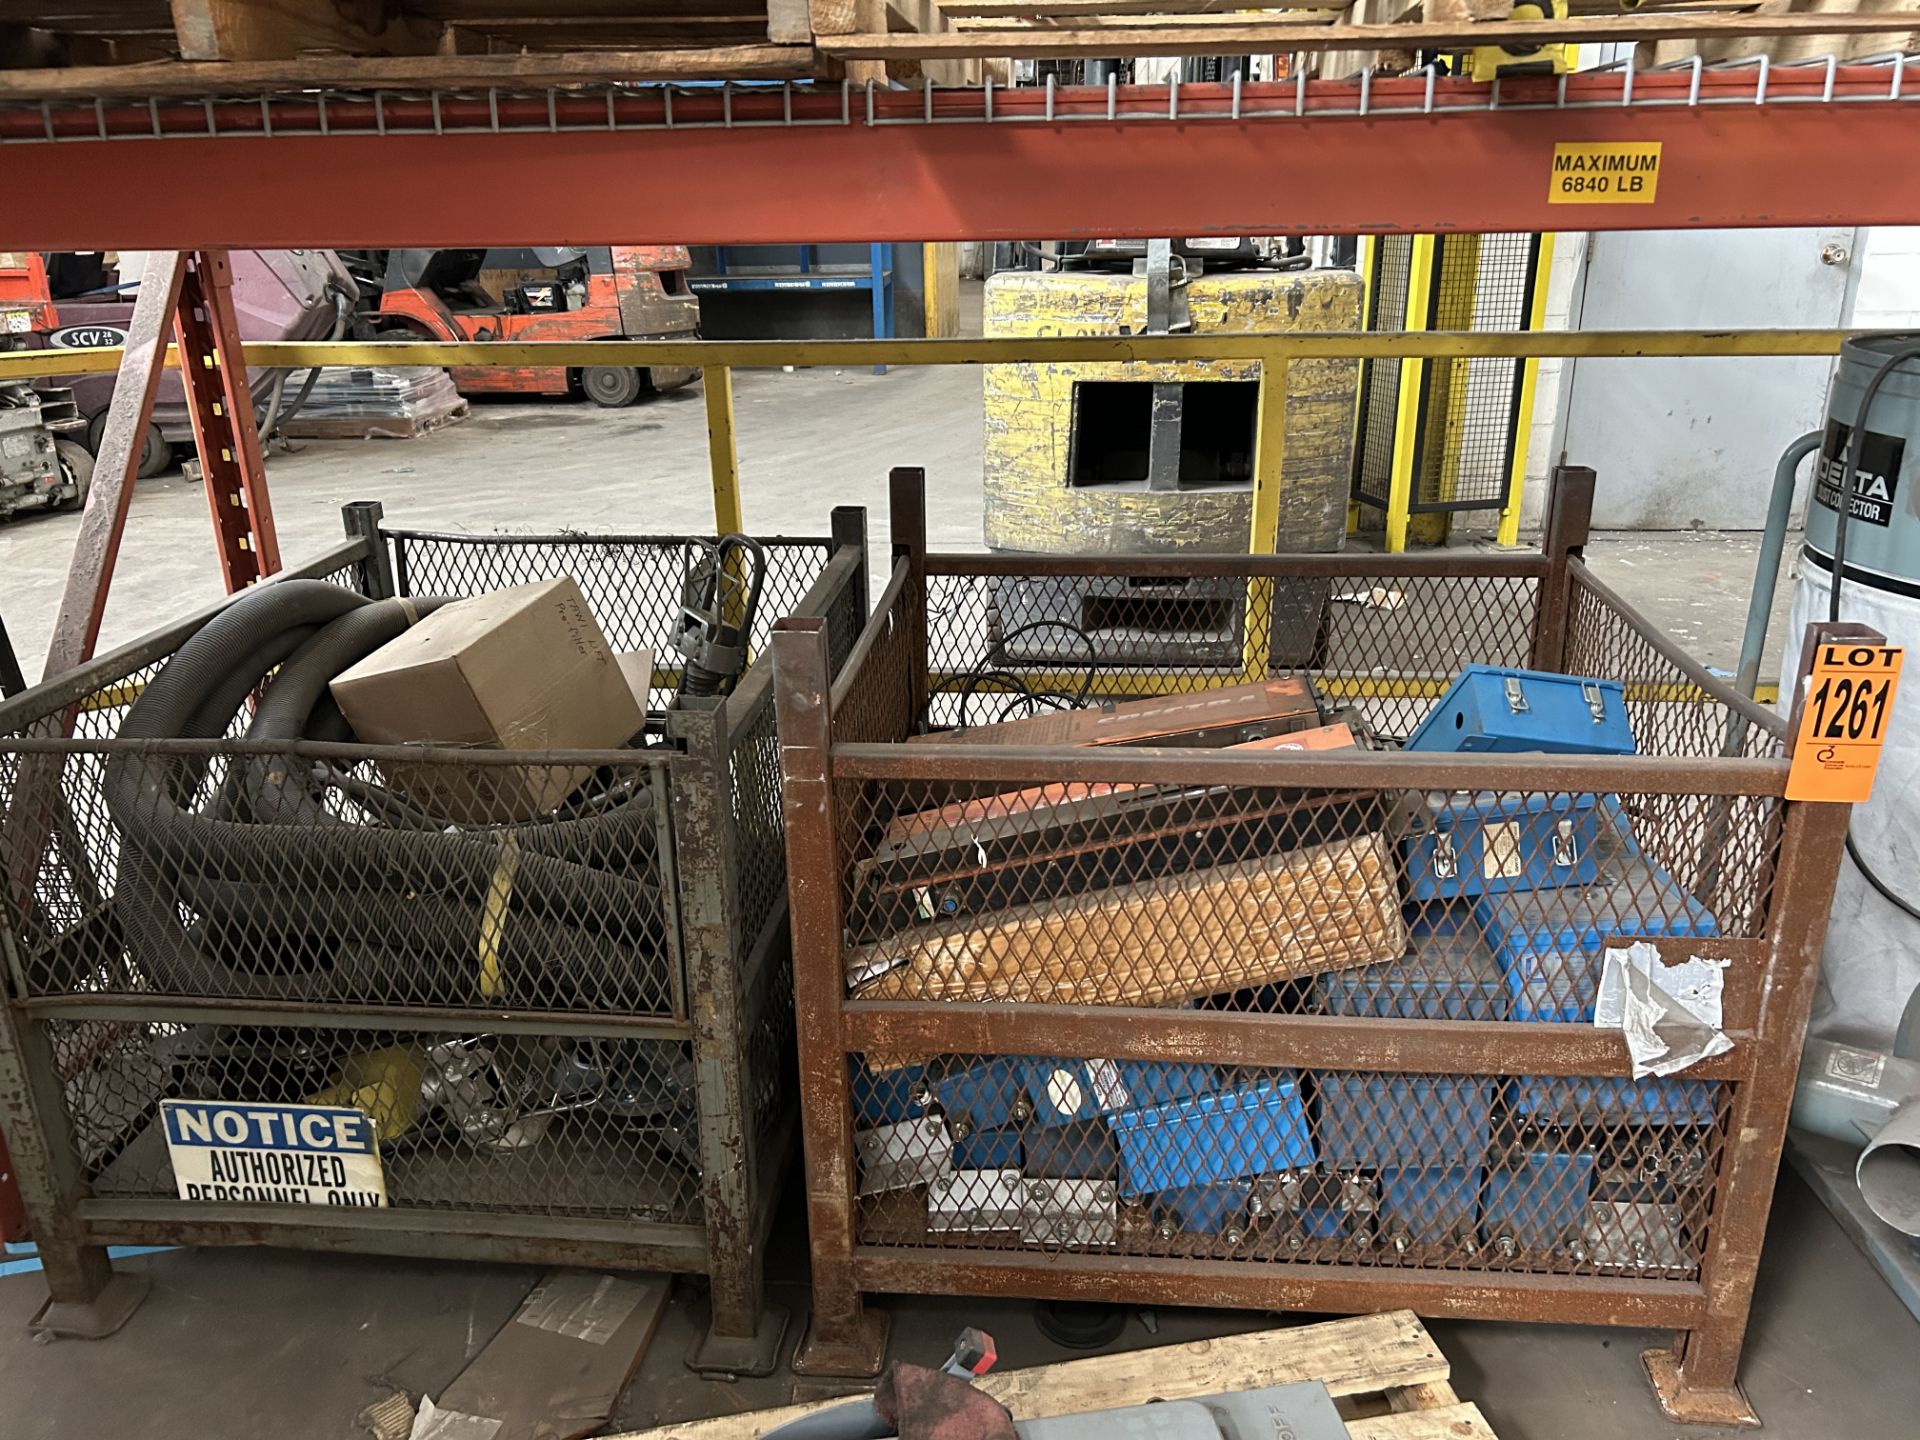 (2) Totes and contents of SPECTRA and METALFORM safety barriers, Microguard units, TAWI Vacuum lifte